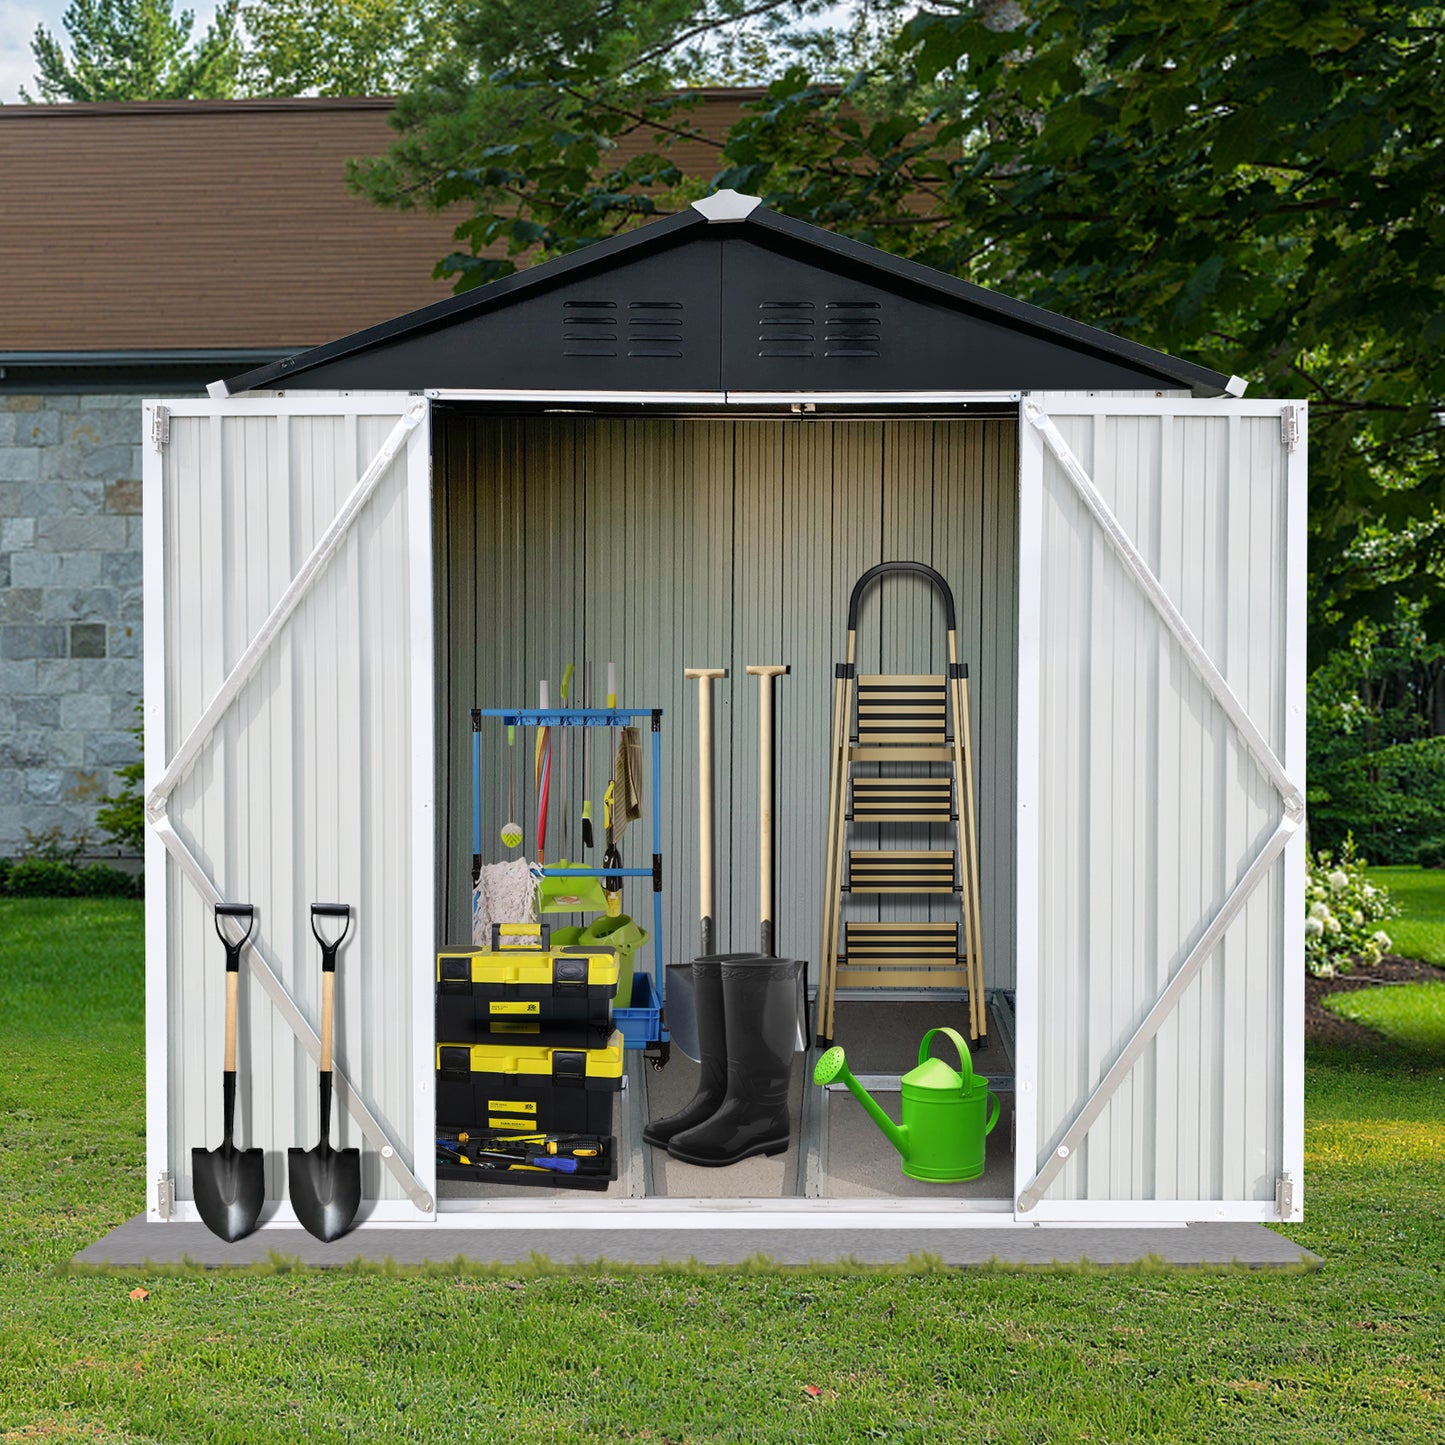 SYNGAR 5' x 3' Outdoor Metal Storage Shed, Garden Shed for Tools, Trash Can, Storage Shed with Single Lockable Door, for Backyard, Patio, Lawn, D6644